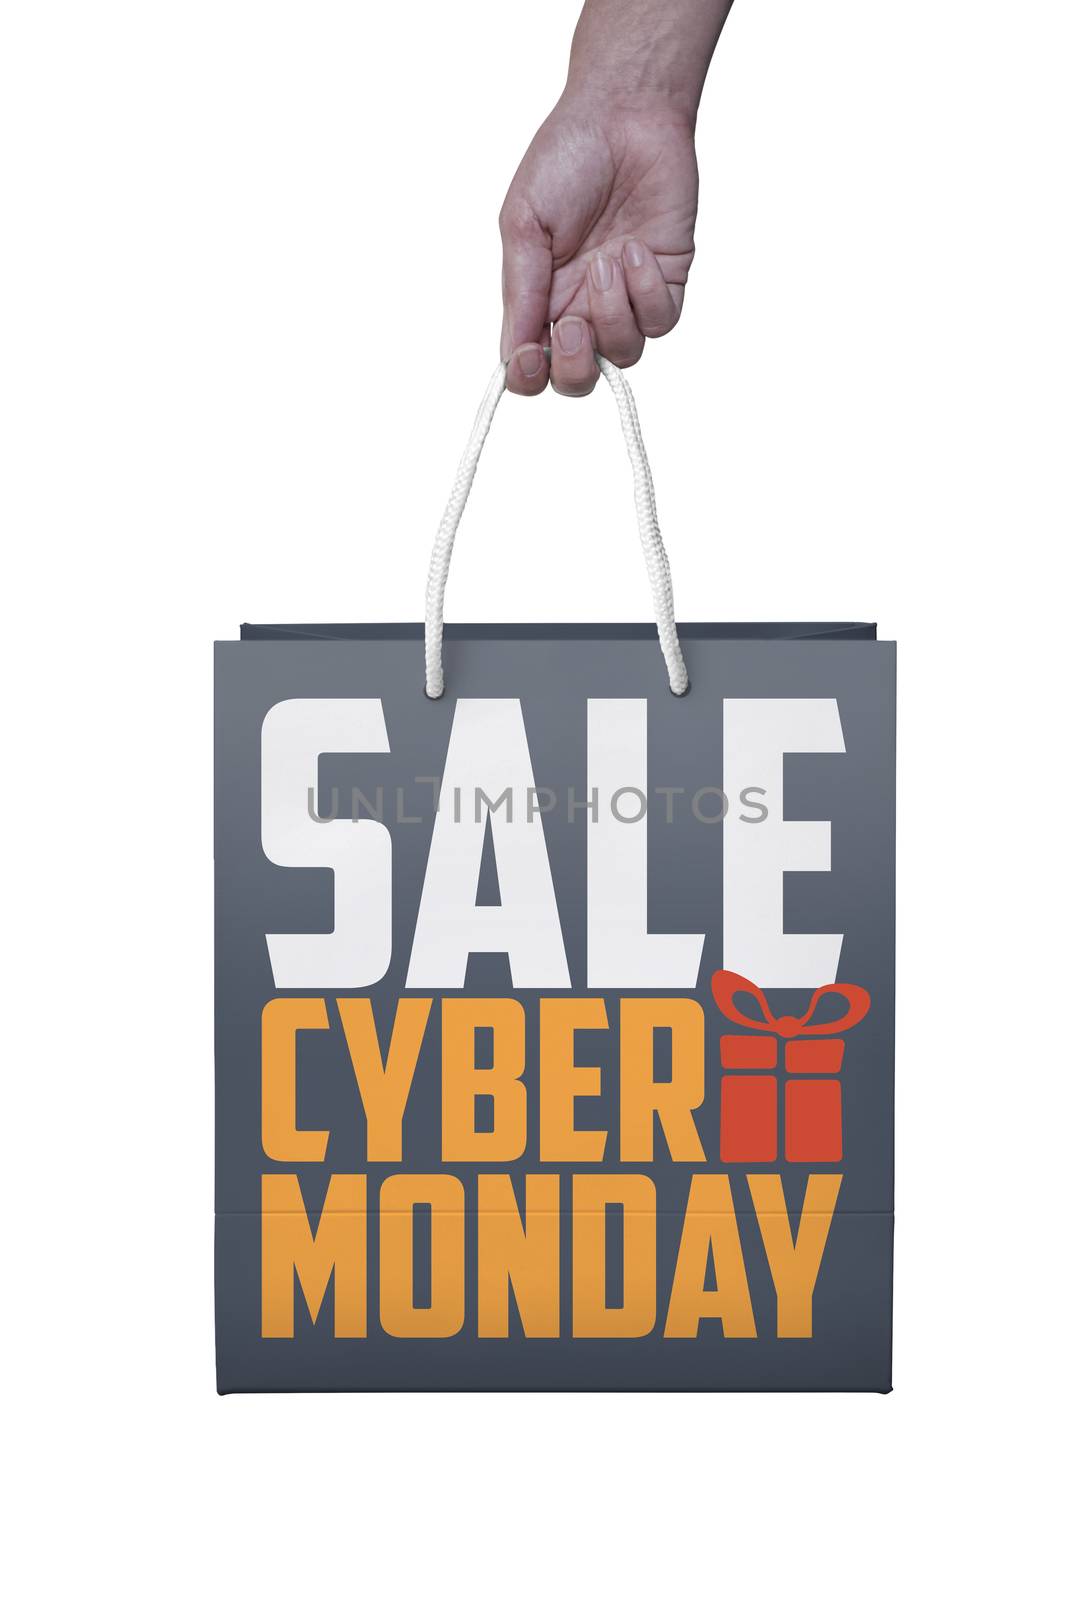 shopper with cyber monday paperbag, PC mouse, laptop. ticket lab by Tjeerdkruse